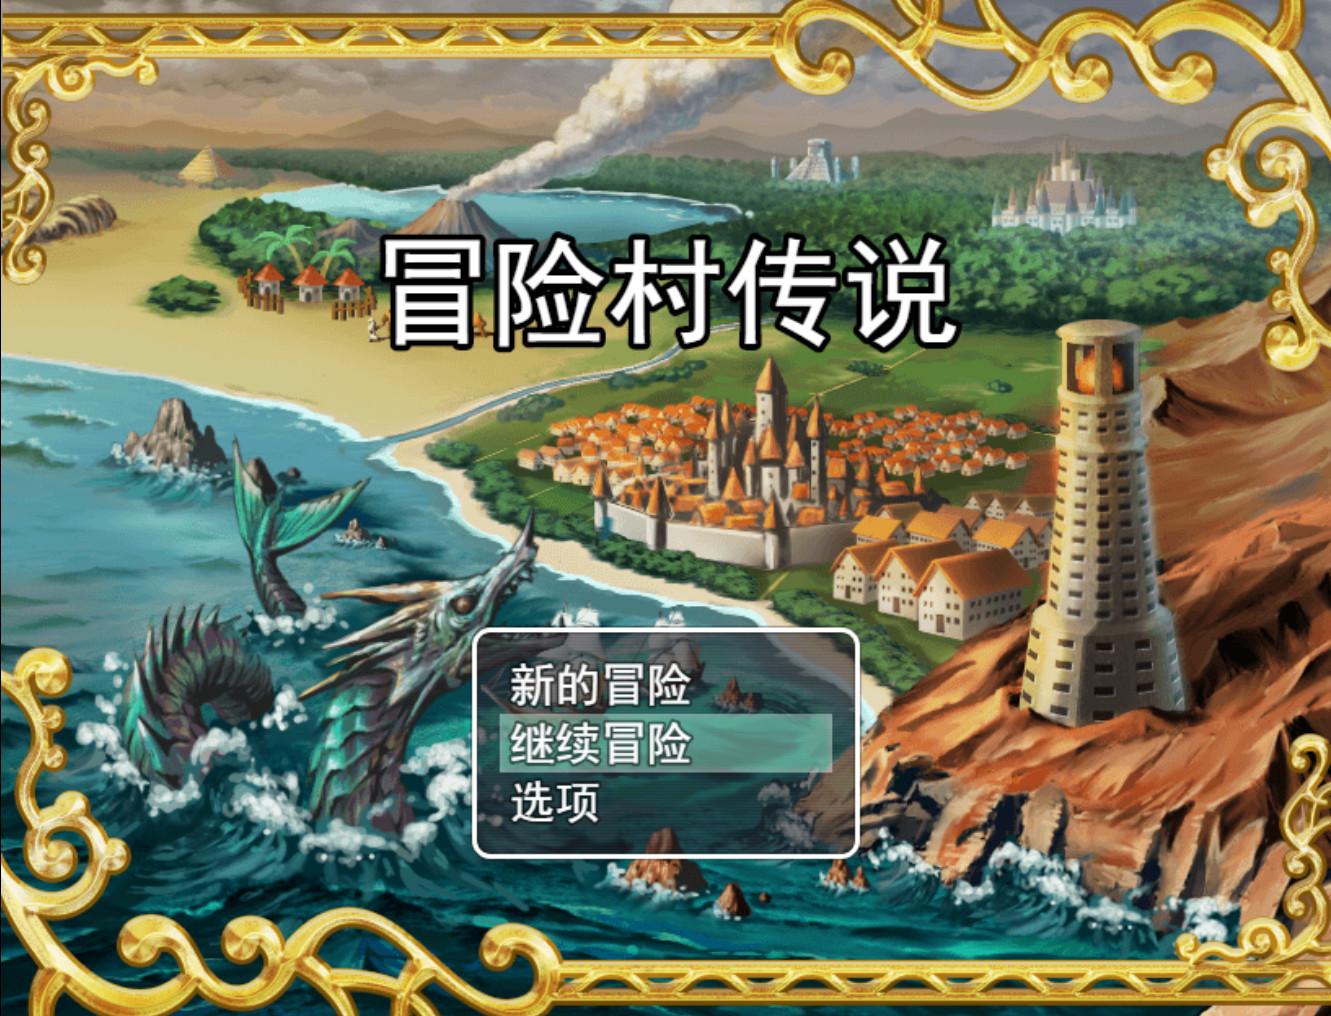 Screenshot №1 from game 冒险村传说（Tales of Legends）